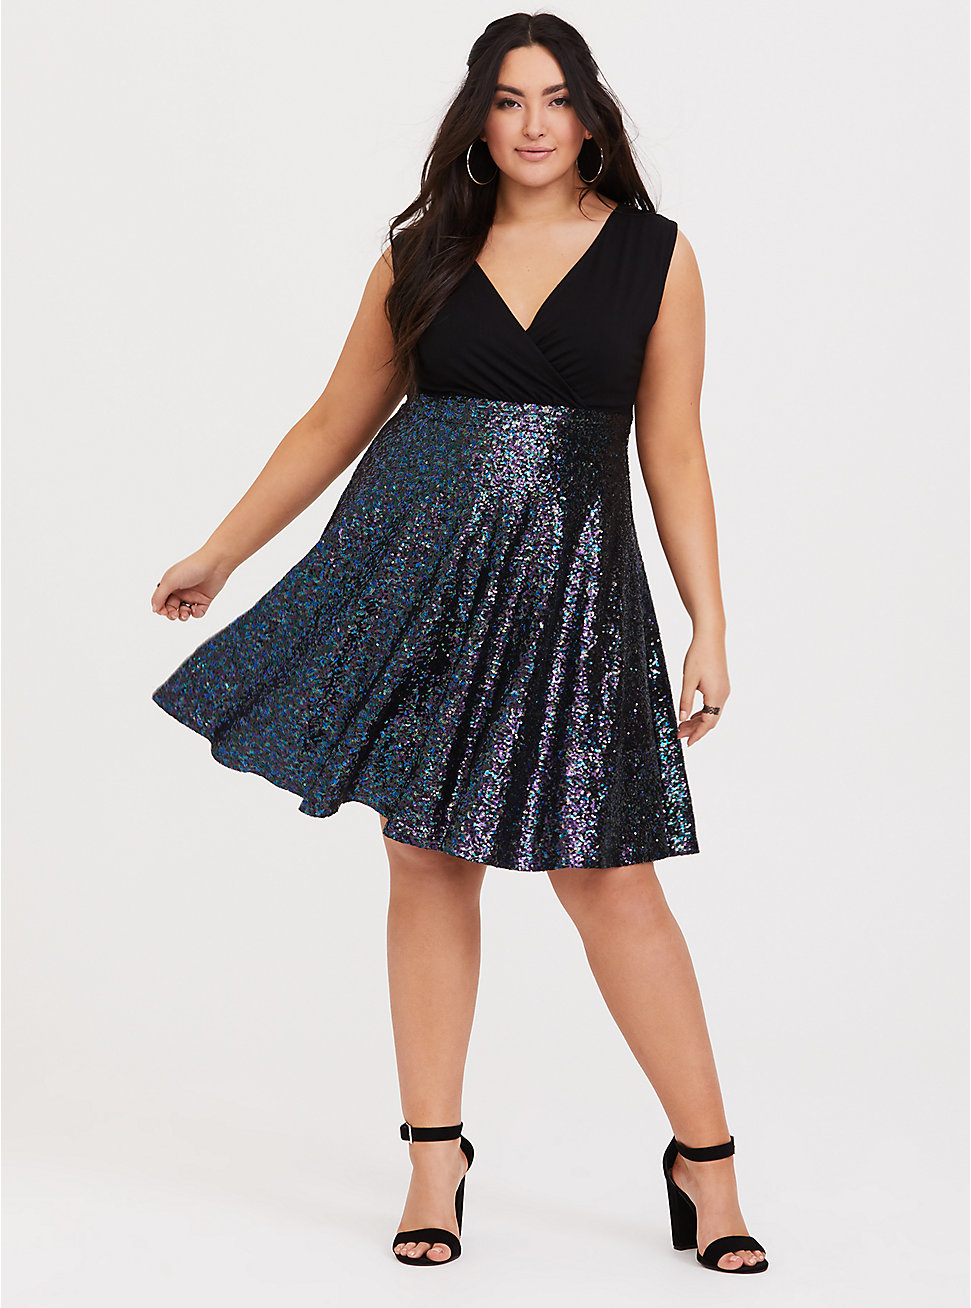 Special Occasion Black Sequin Skater Dress -   12 dress Skater outfit ideas